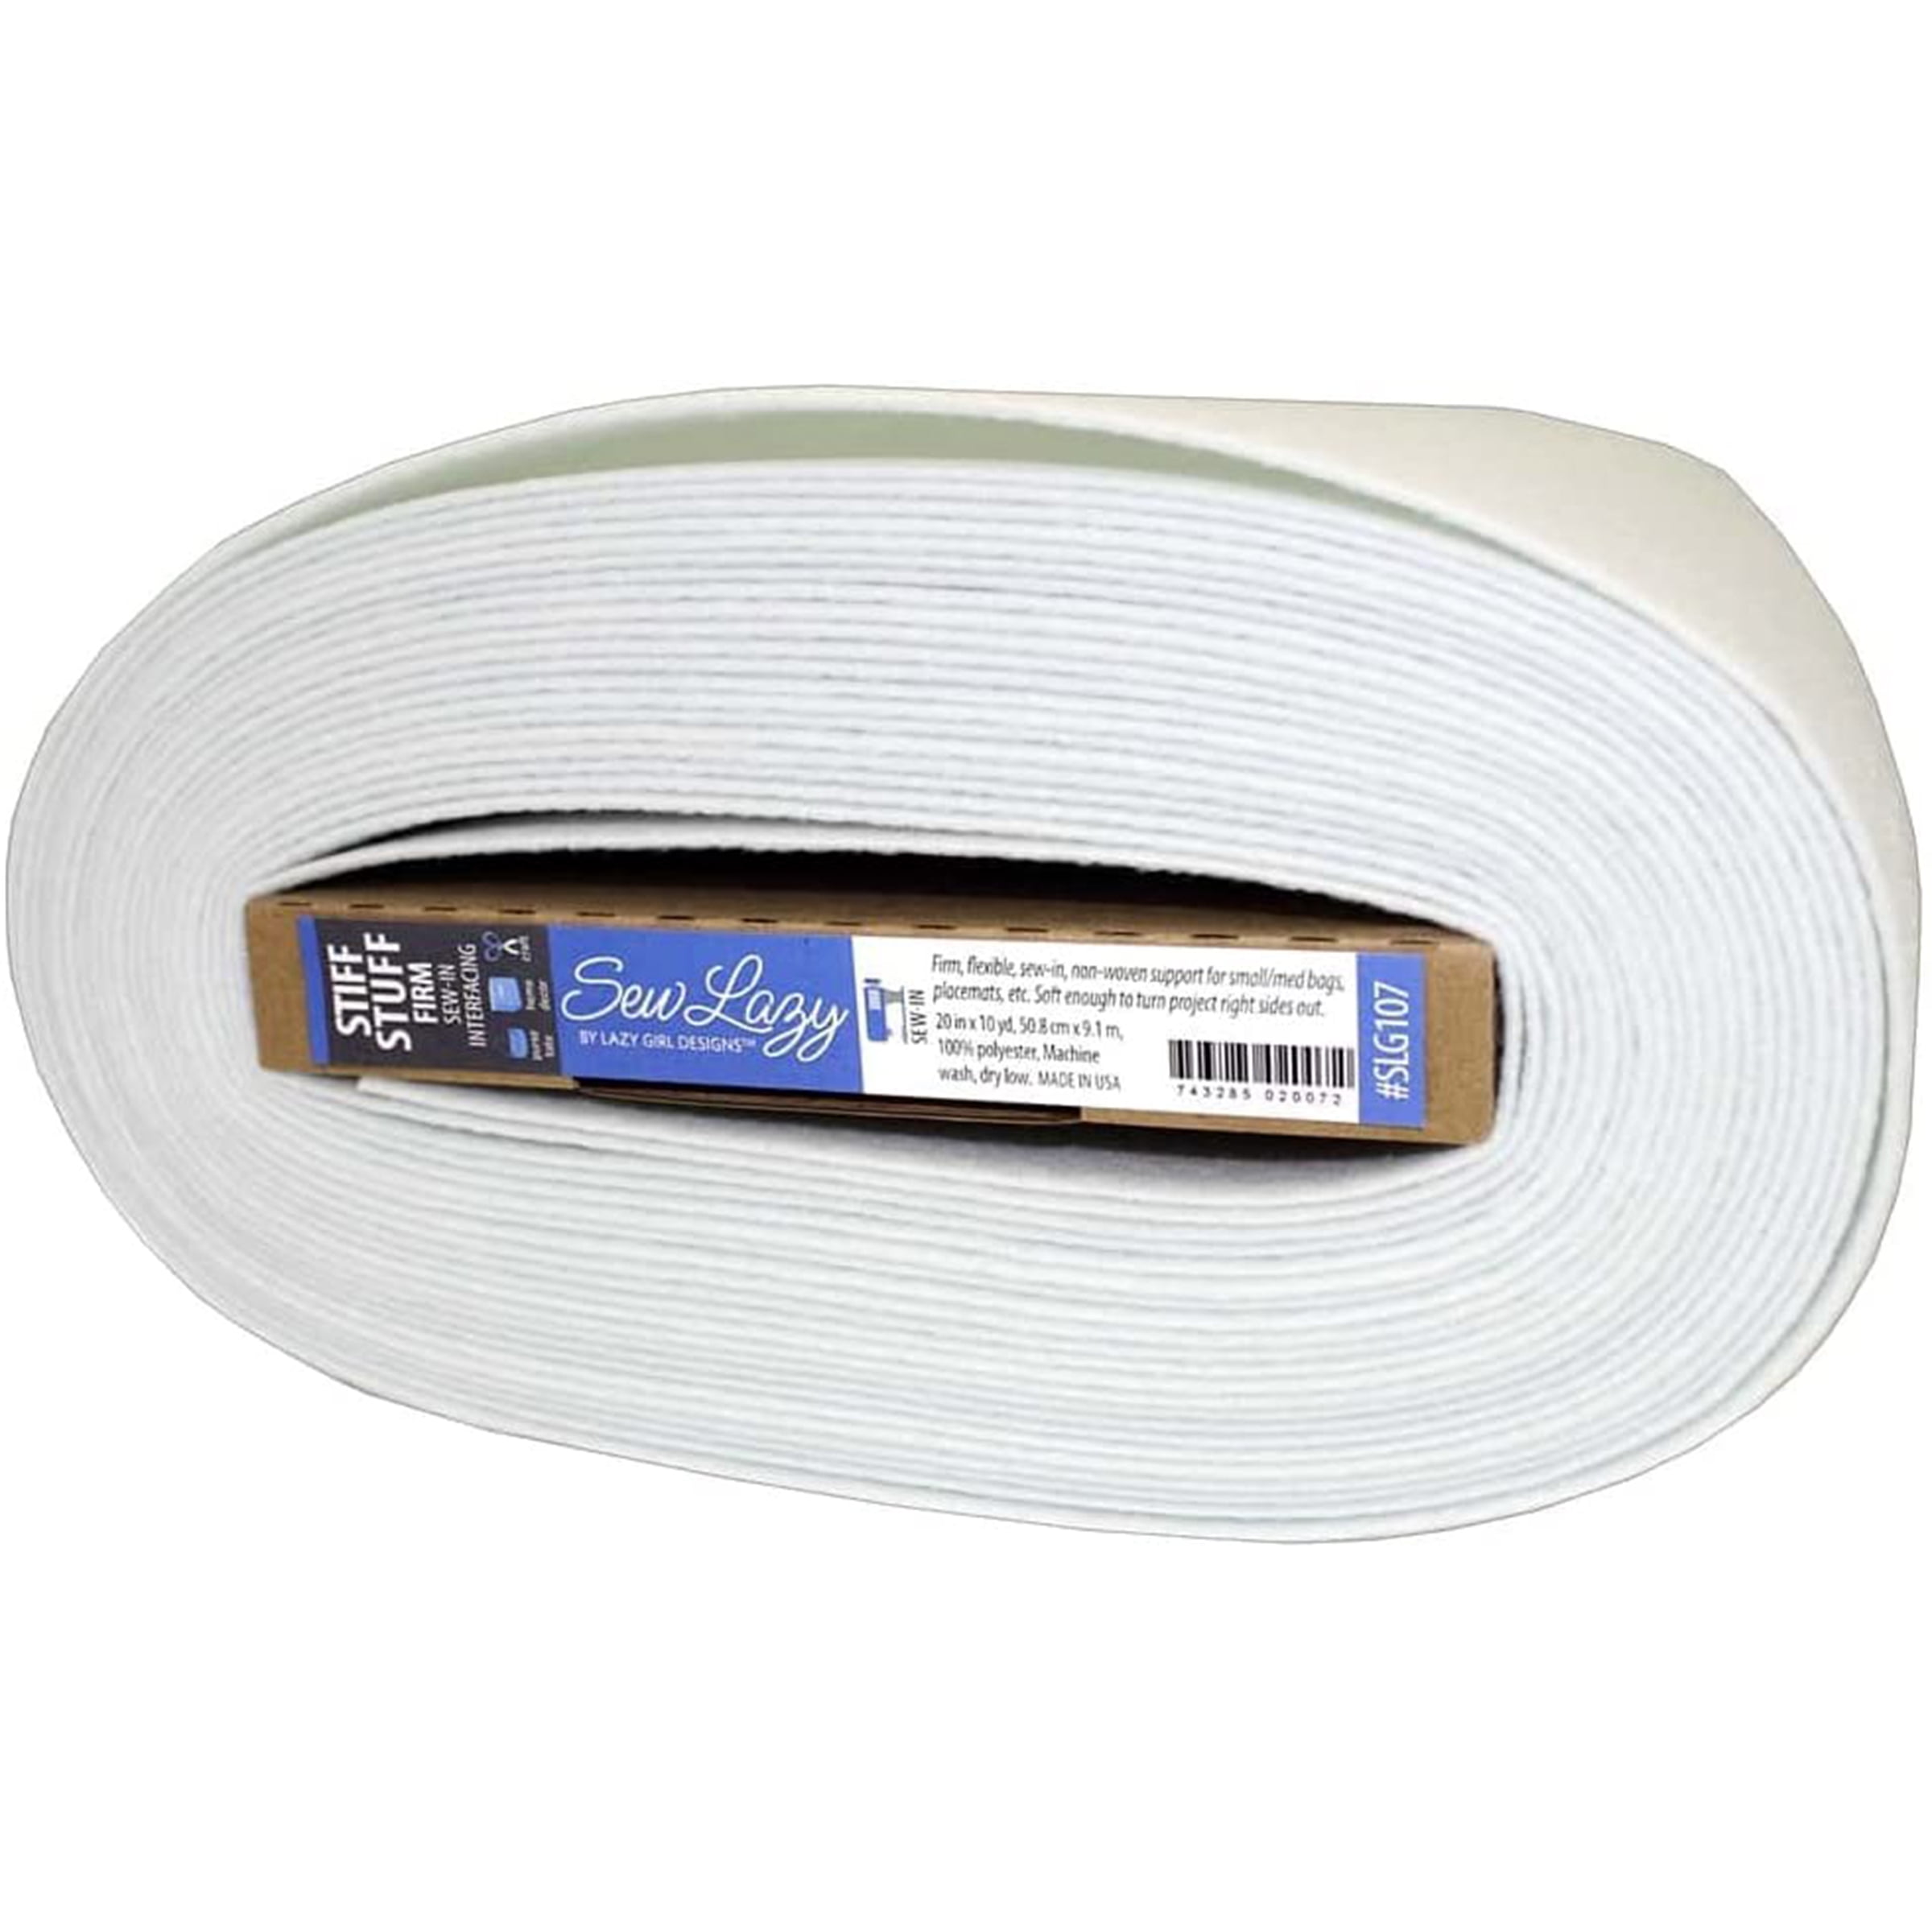 Fast2fuse Light Bolt 20 X 10 Yards: Double-Sided Fusible Stiff Interfacing